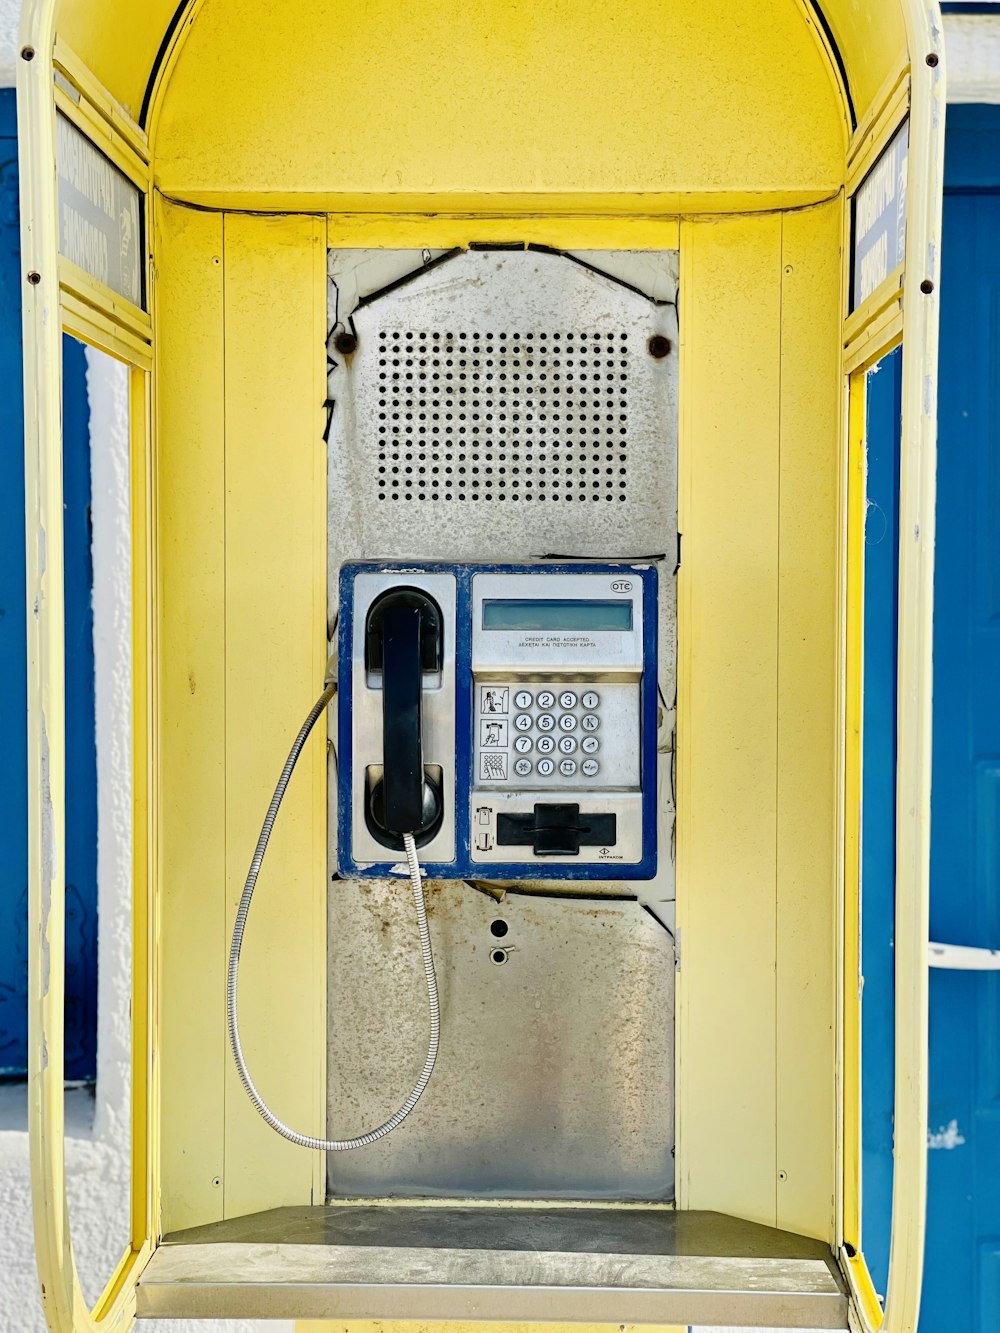 an old fashioned pay phone in front of a blue door